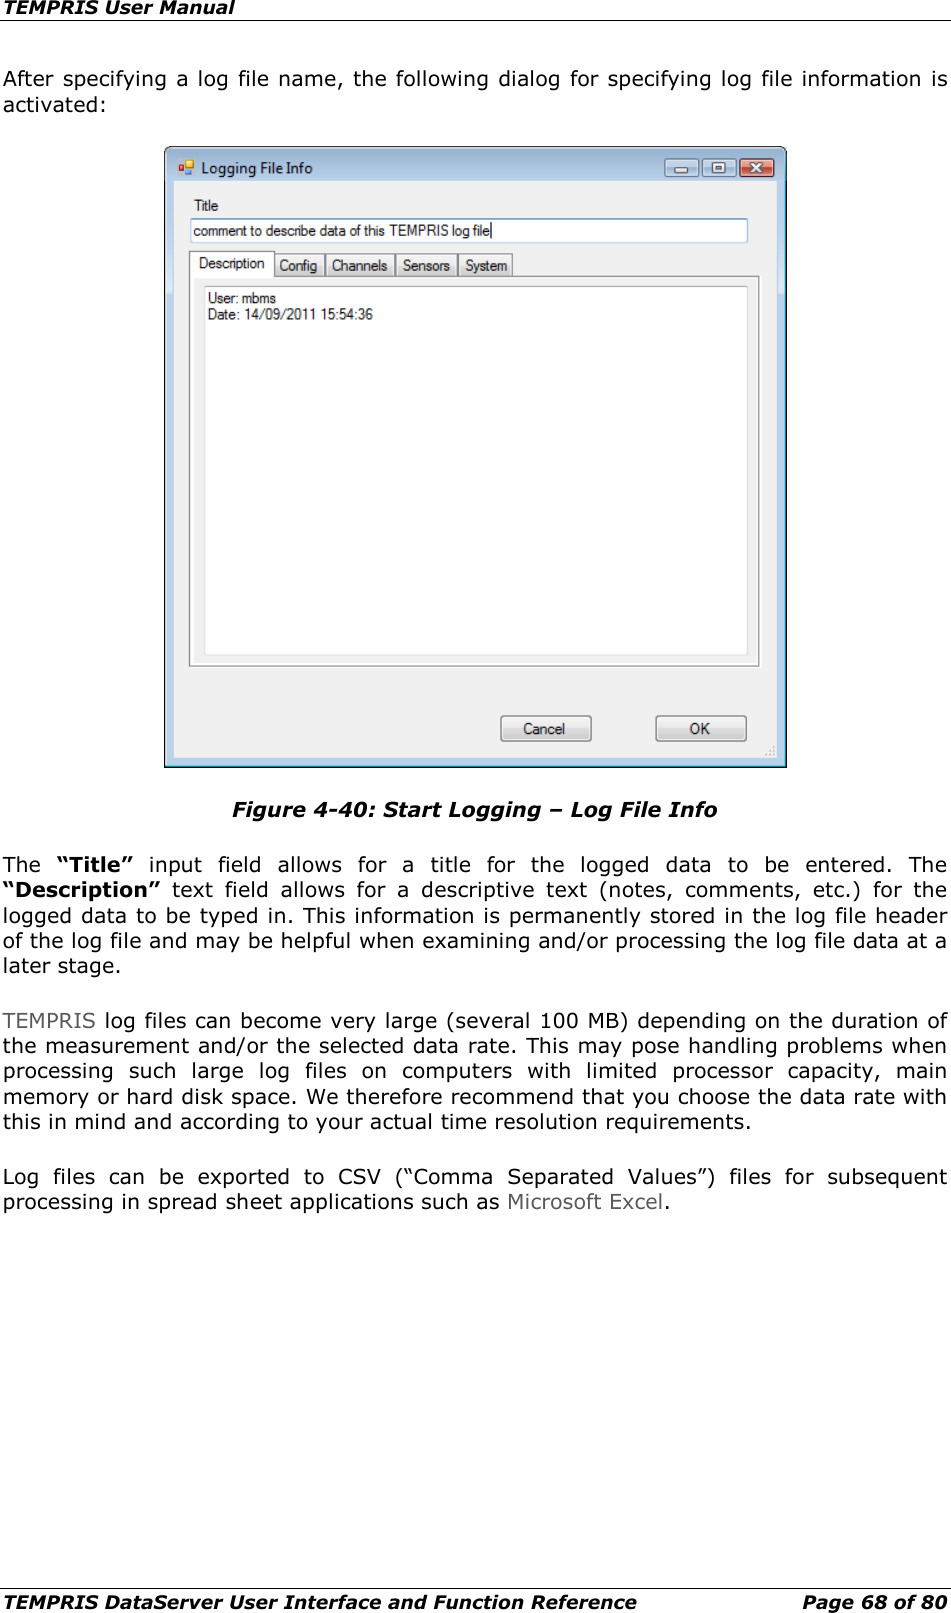 TEMPRIS User Manual TEMPRIS DataServer User Interface and Function Reference Page 68 of 80 After specifying a log file name, the following dialog for specifying log file information is activated:  Figure 4-40: Start Logging – Log File Info The  “Title” input  field allows for a title for the logged data to be entered.  The “Description” text field allows for a descriptive text (notes, comments, etc.) for the logged data to be typed in. This information is permanently stored in the log file header of the log file and may be helpful when examining and/or processing the log file data at a later stage. TEMPRIS log files can become very large (several 100 MB) depending on the duration of the measurement and/or the selected data rate. This may pose handling problems when processing such large log files on computers with limited processor capacity, main memory or hard disk space. We therefore recommend that you choose the data rate with this in mind and according to your actual time resolution requirements. Log files can be exported to CSV (“Comma Separated Values”) files for subsequent processing in spread sheet applications such as Microsoft Excel.    